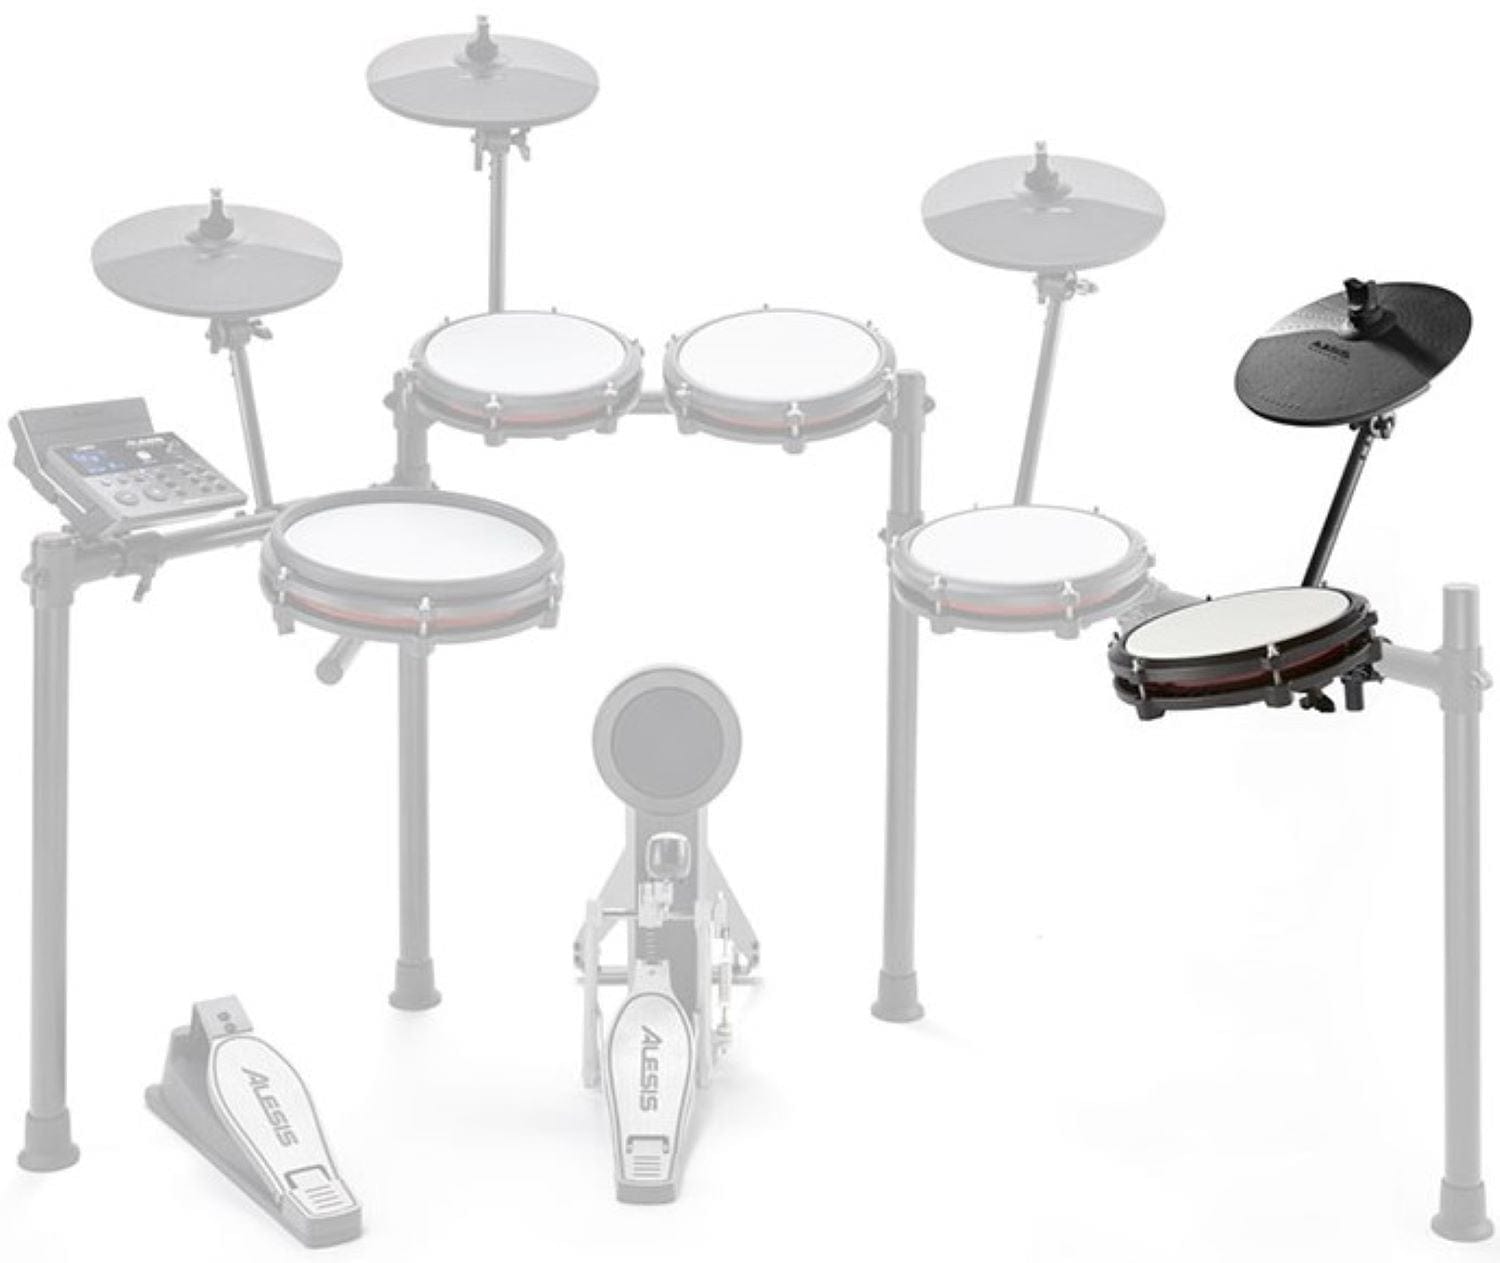 Alesis Nitro Max Expansion Pack with Mesh Drum Pad / 10 inch Cymbal / Hardware - PSSL ProSound and Stage Lighting